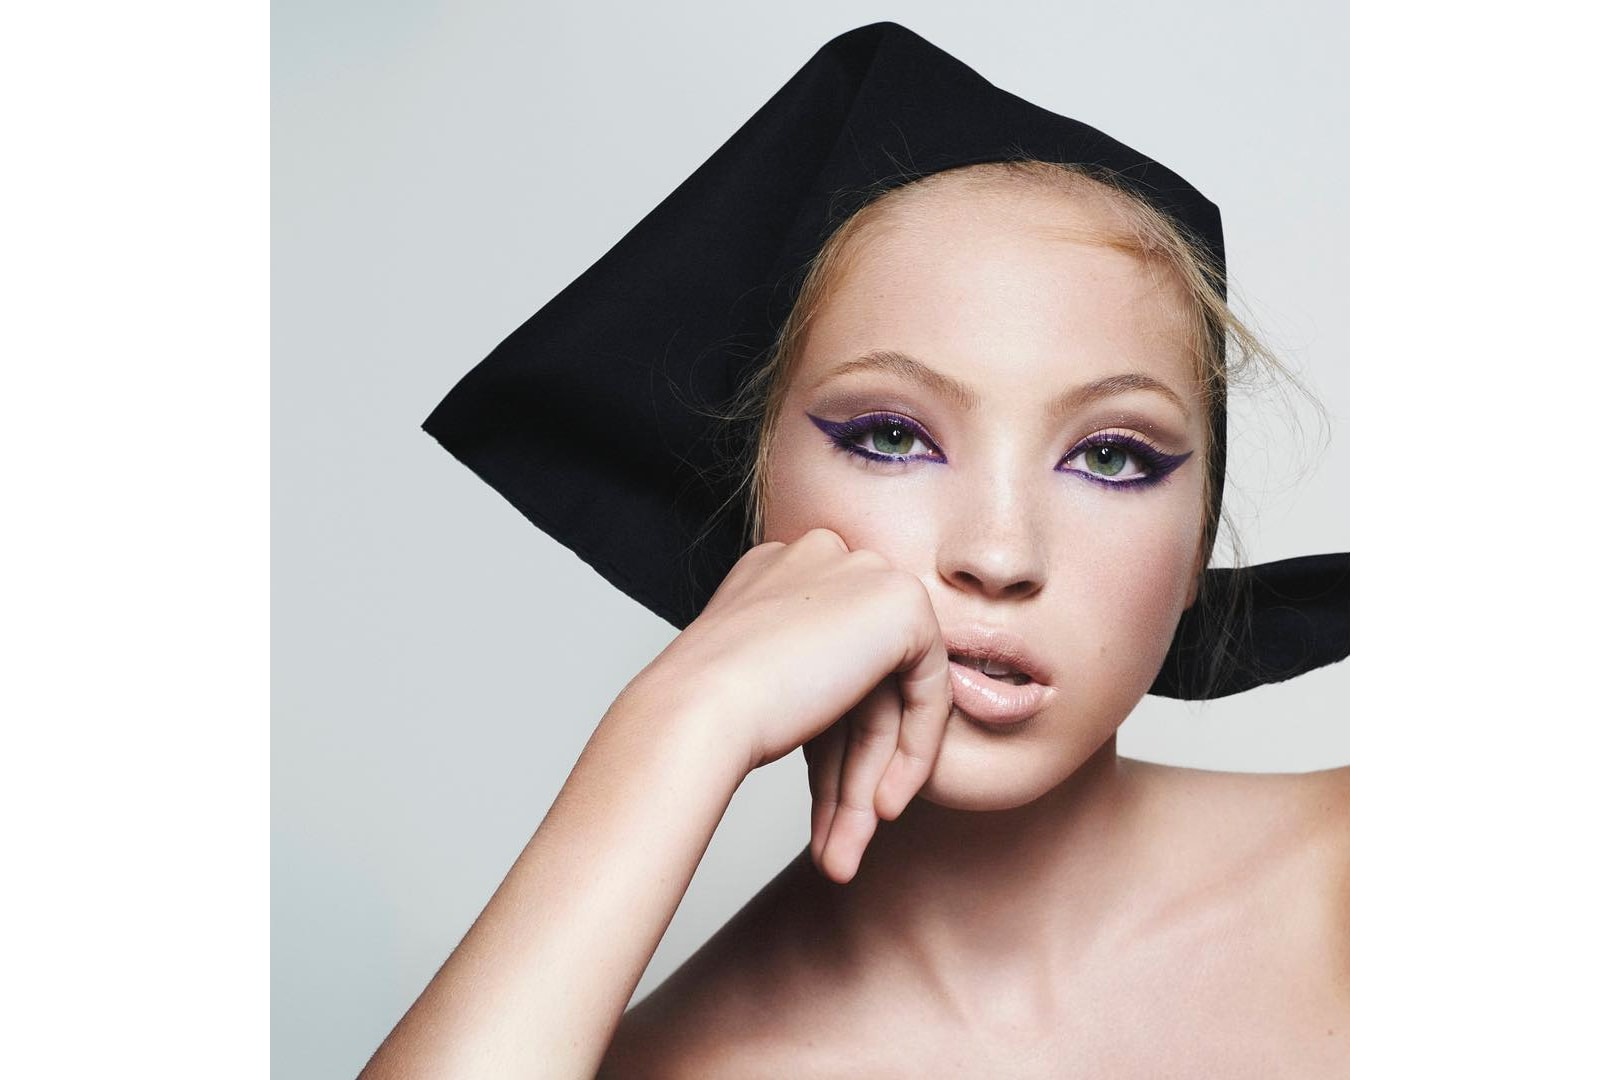 lila moss kate moss daughter marc jacobs beauty campaign new face david sims harvey nichols sephora makeup fineliner